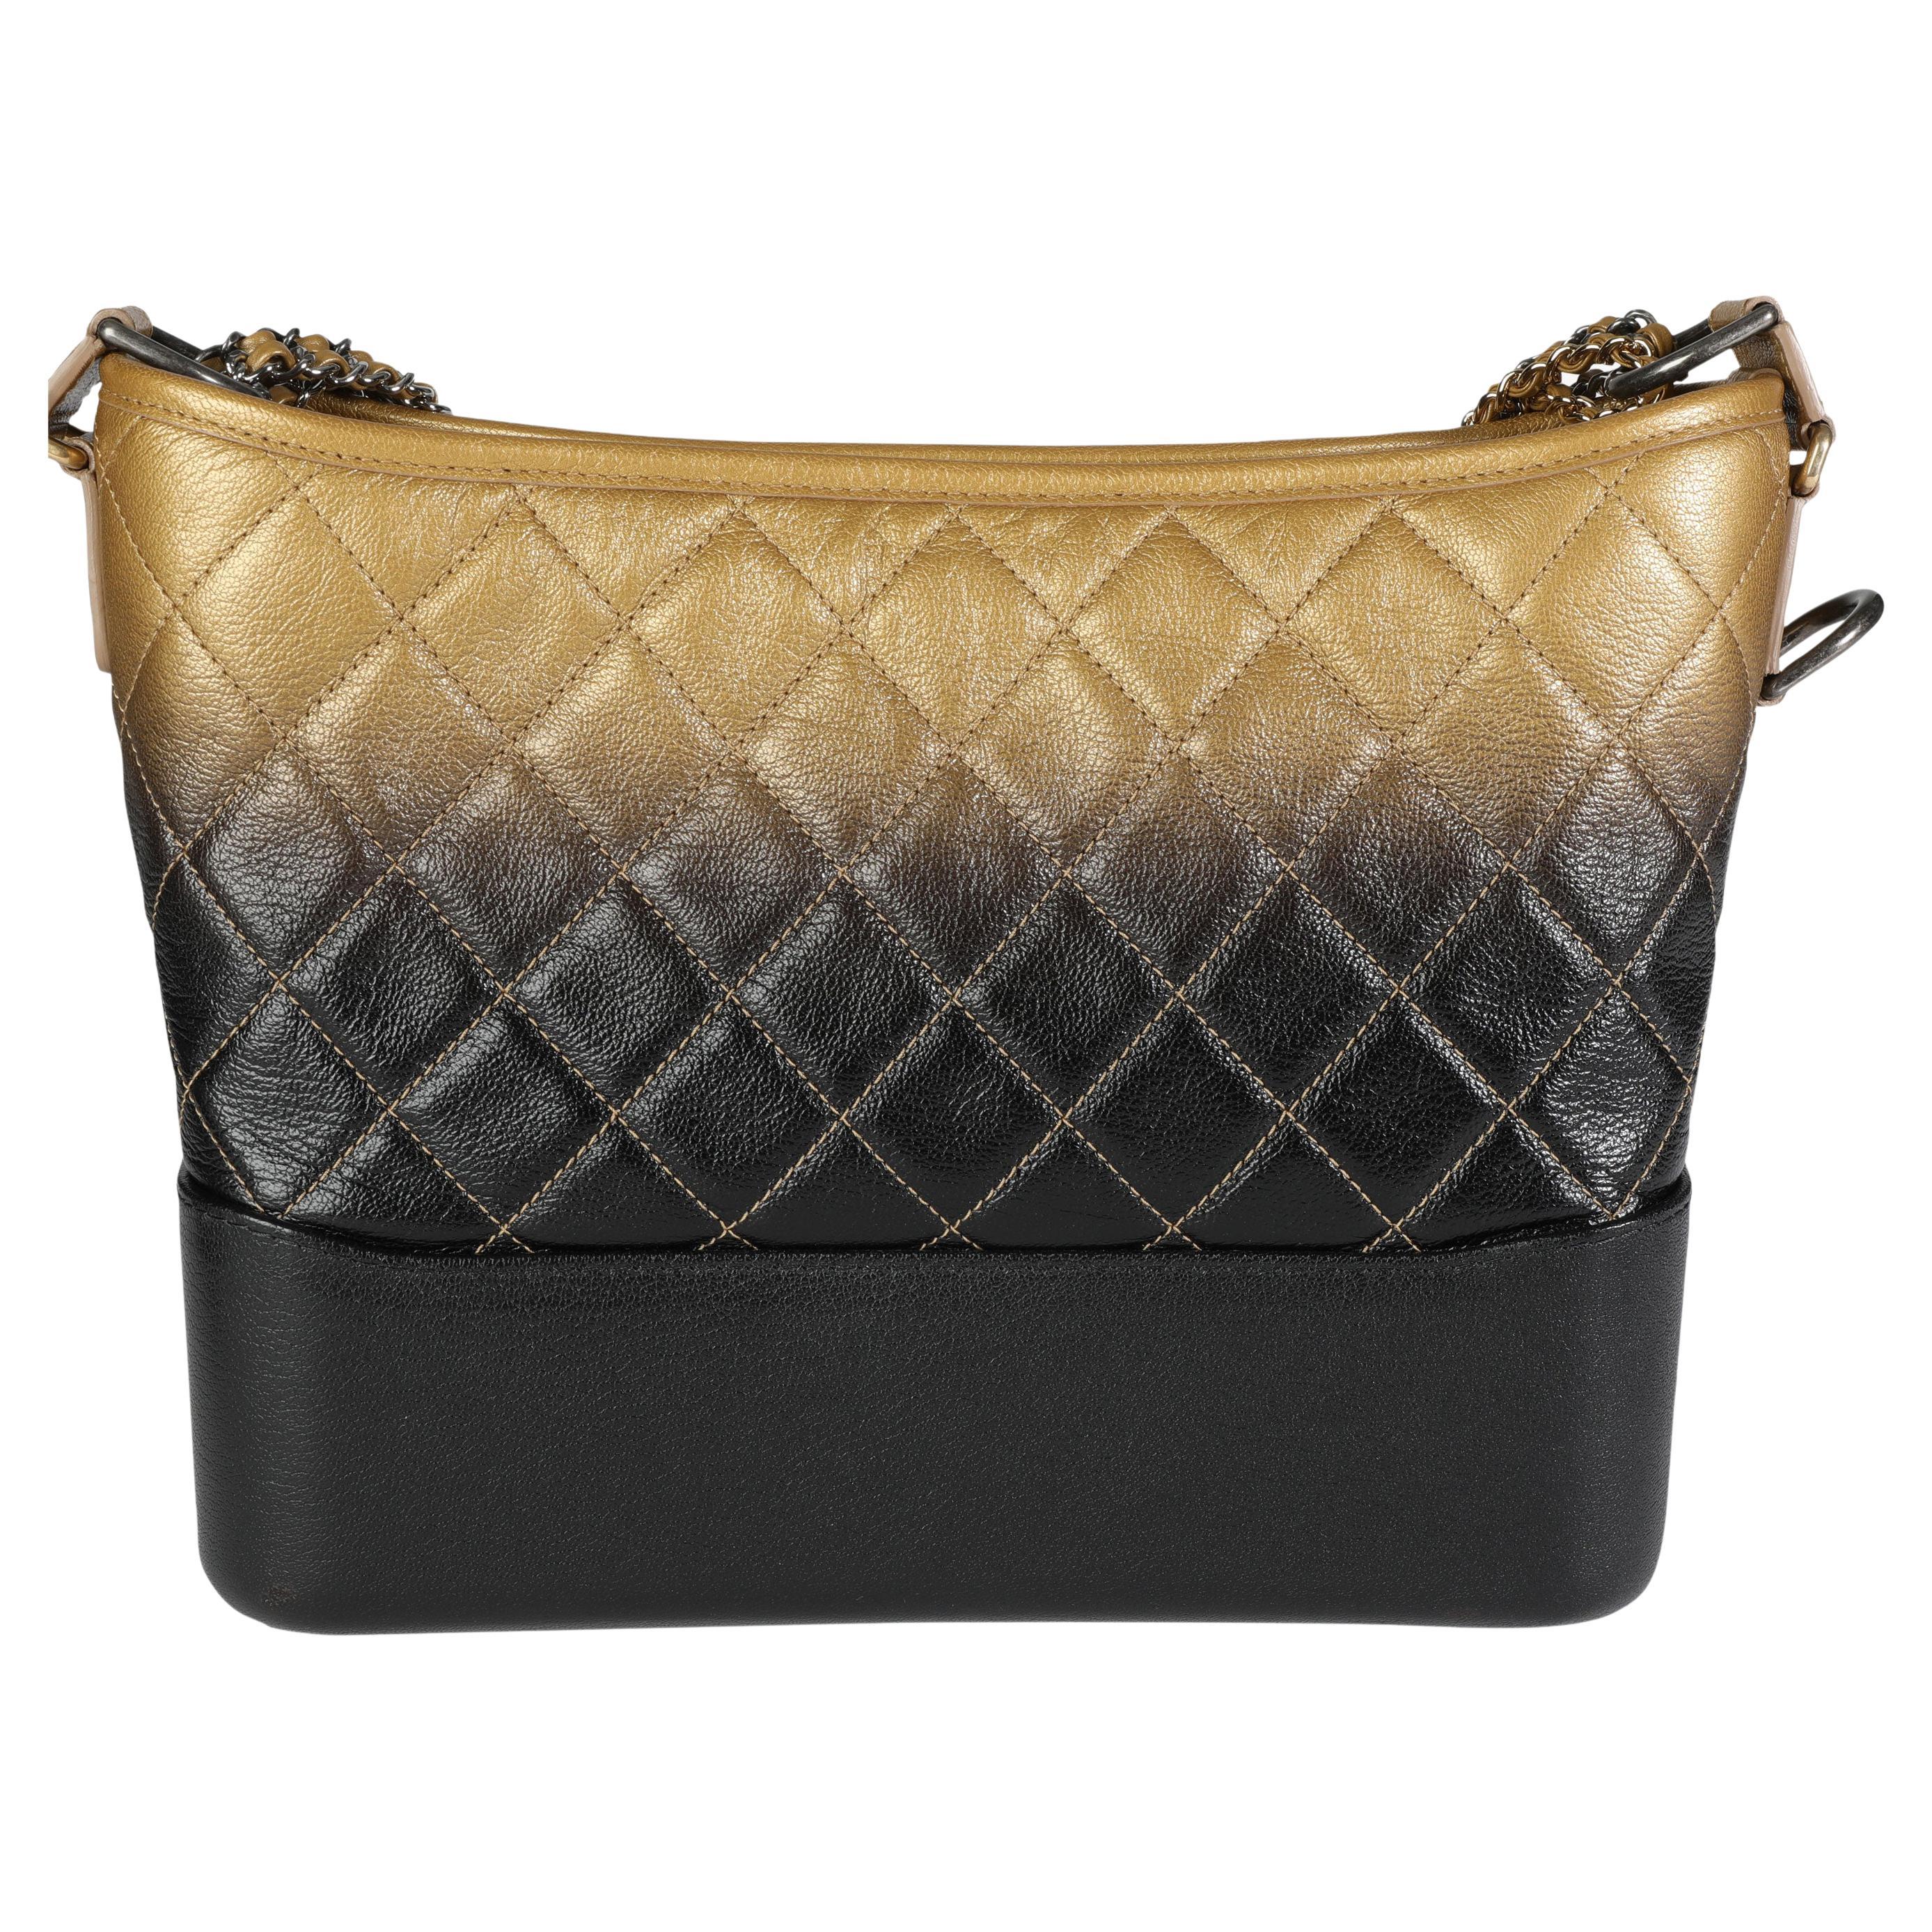 Chanel Black & Gold Ombré Quilted Goatskin Medium Gabrielle Hobo For Sale